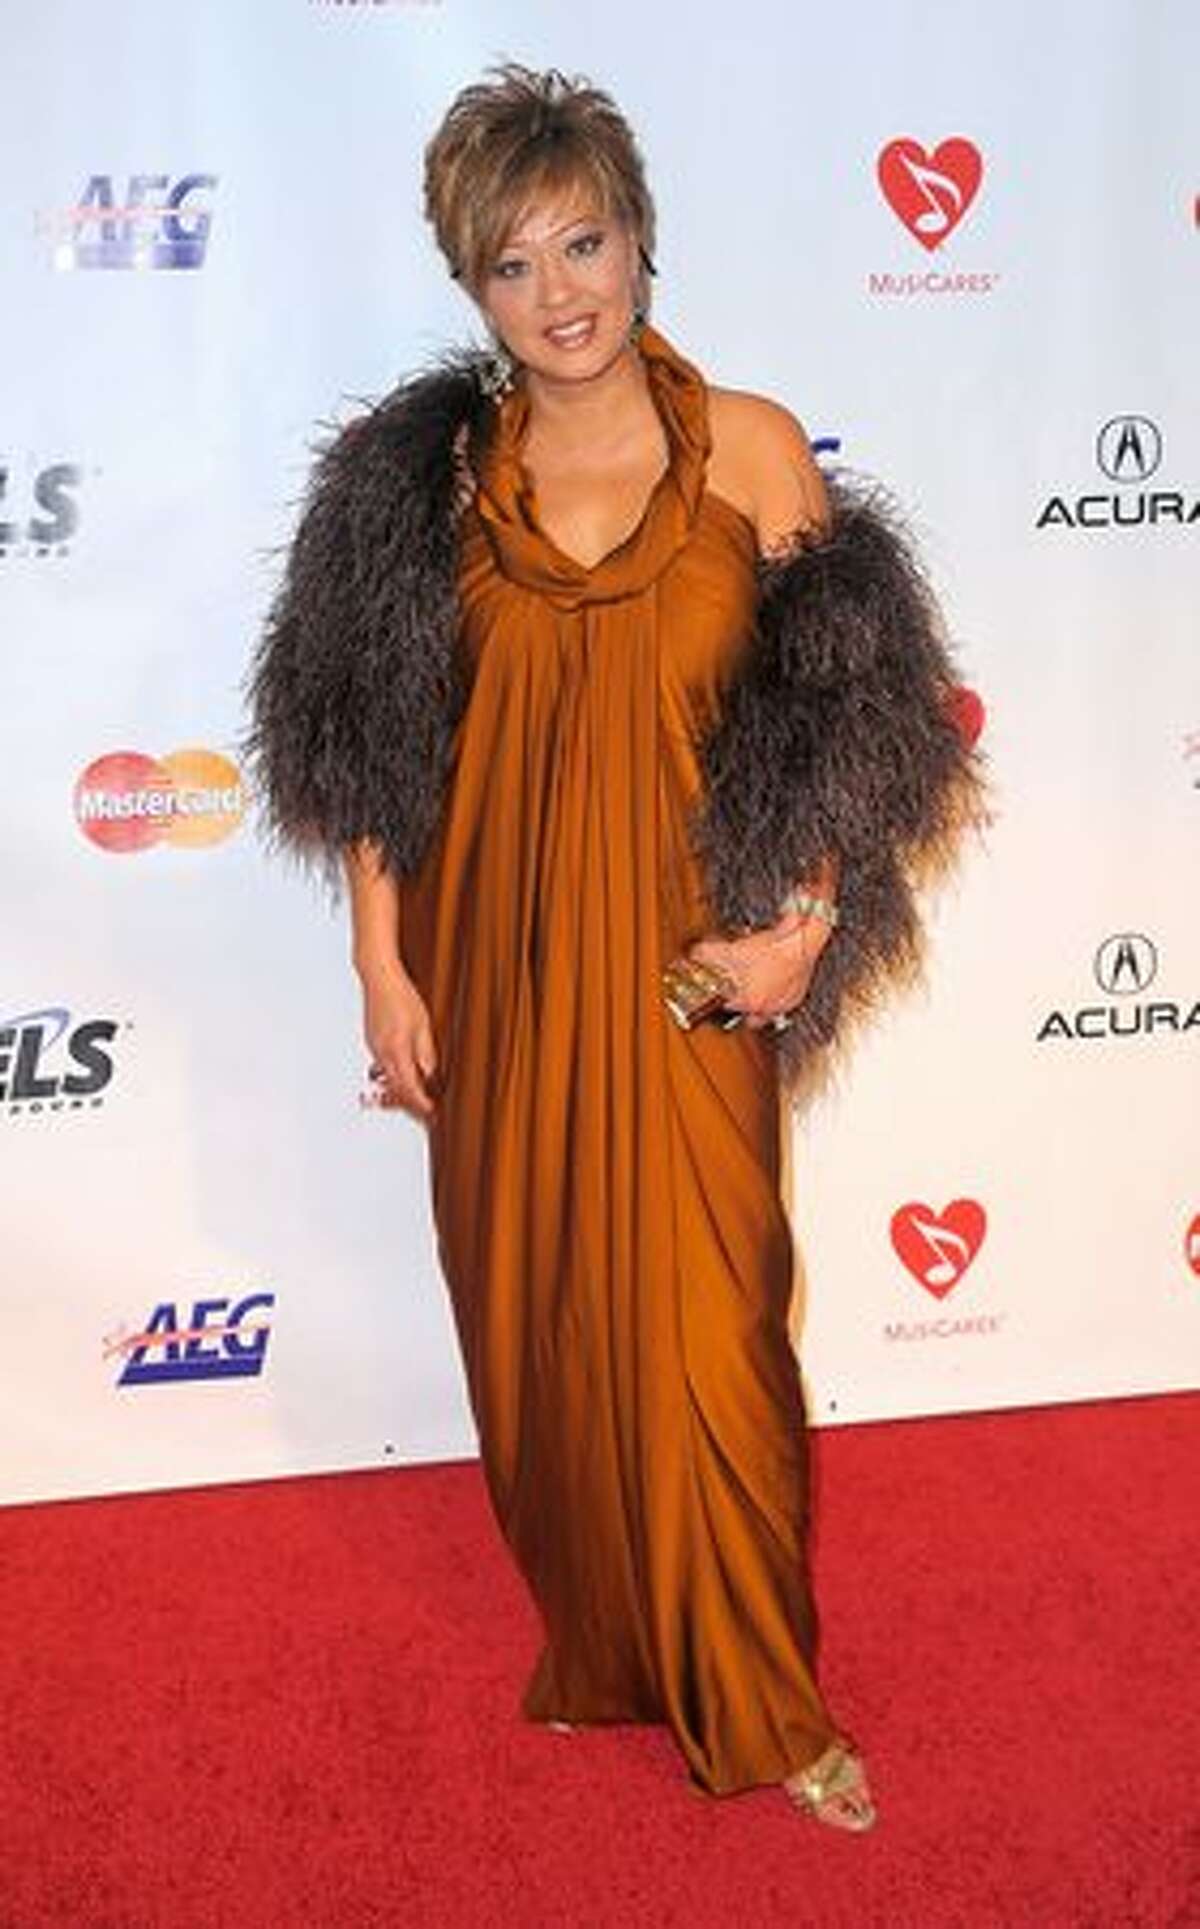 Singer Rosalina arrives at the 2010 MusiCares Person Of The Year Tribute To Neil Young at the Los Angeles Convention Center on January 29, 2010 in Los Angeles, California.